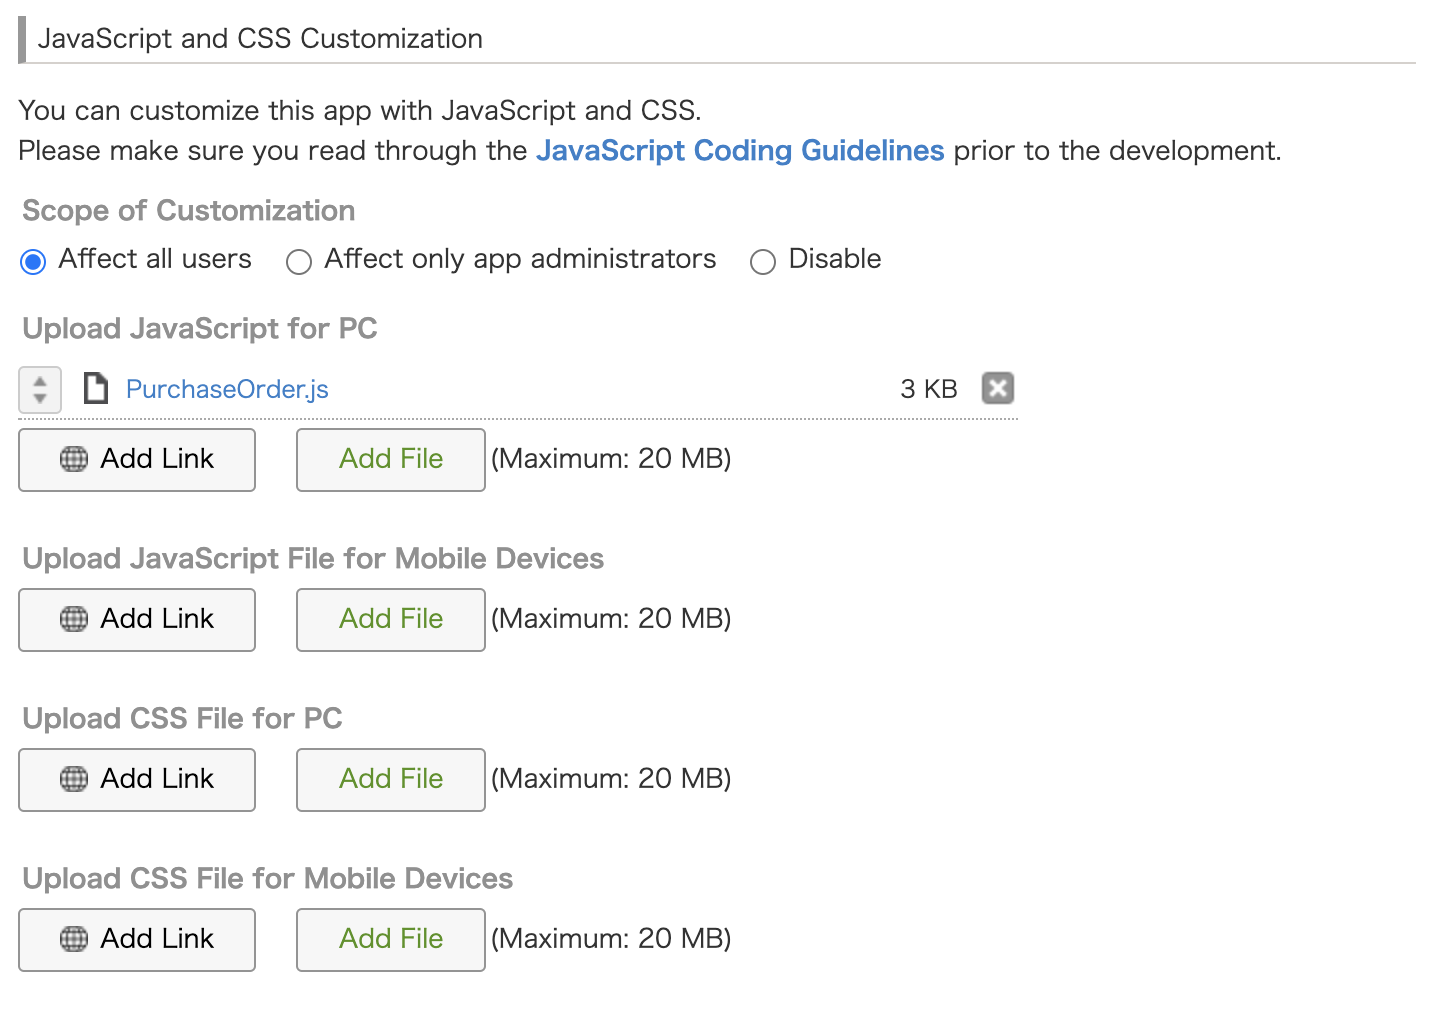 Screenshot: The necessary files have been uploaded on the JavaScript and CSS Customization page.